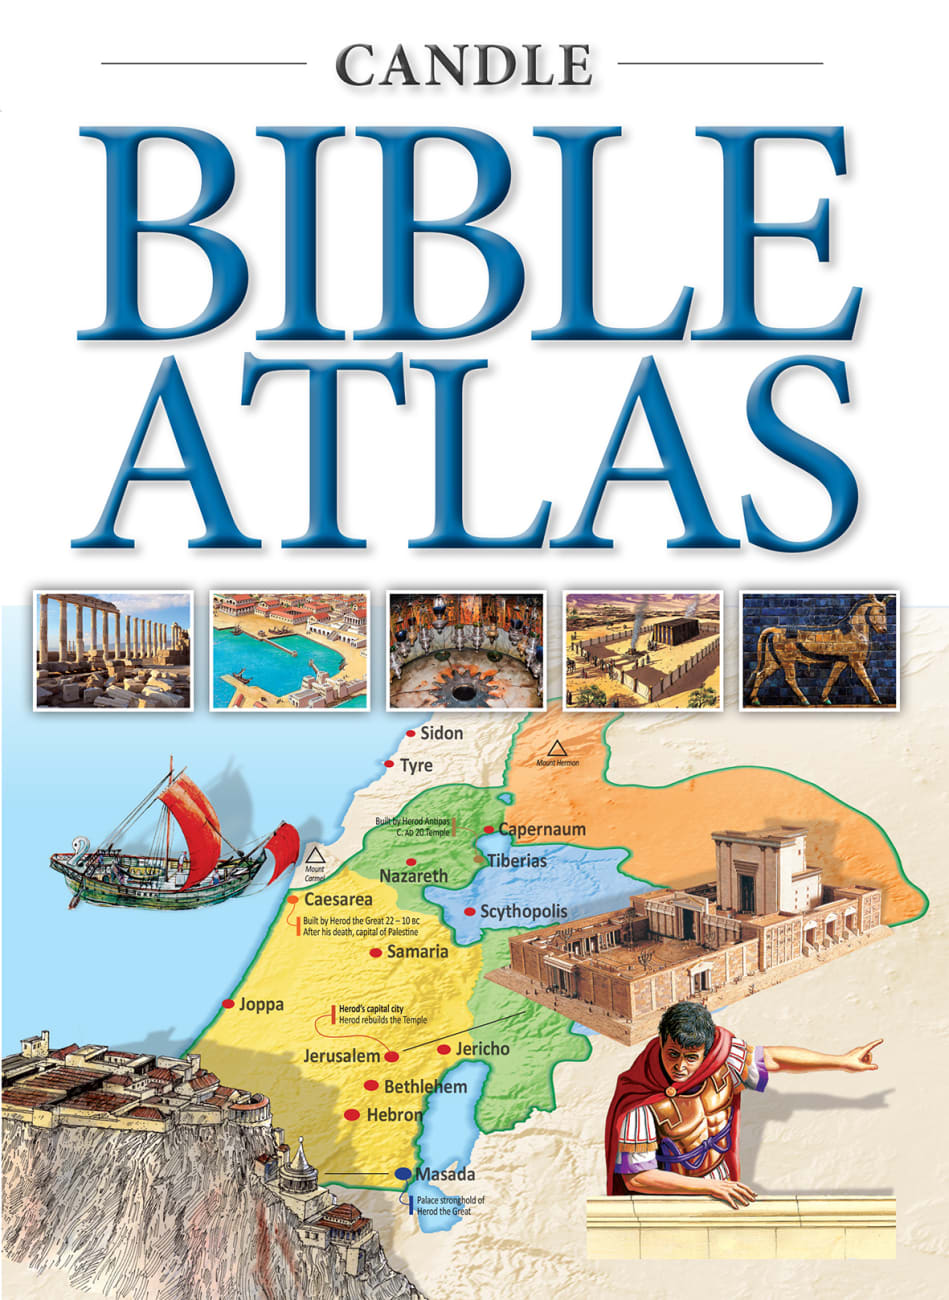 Bible Atlas (Candle Classic Series) Paperback